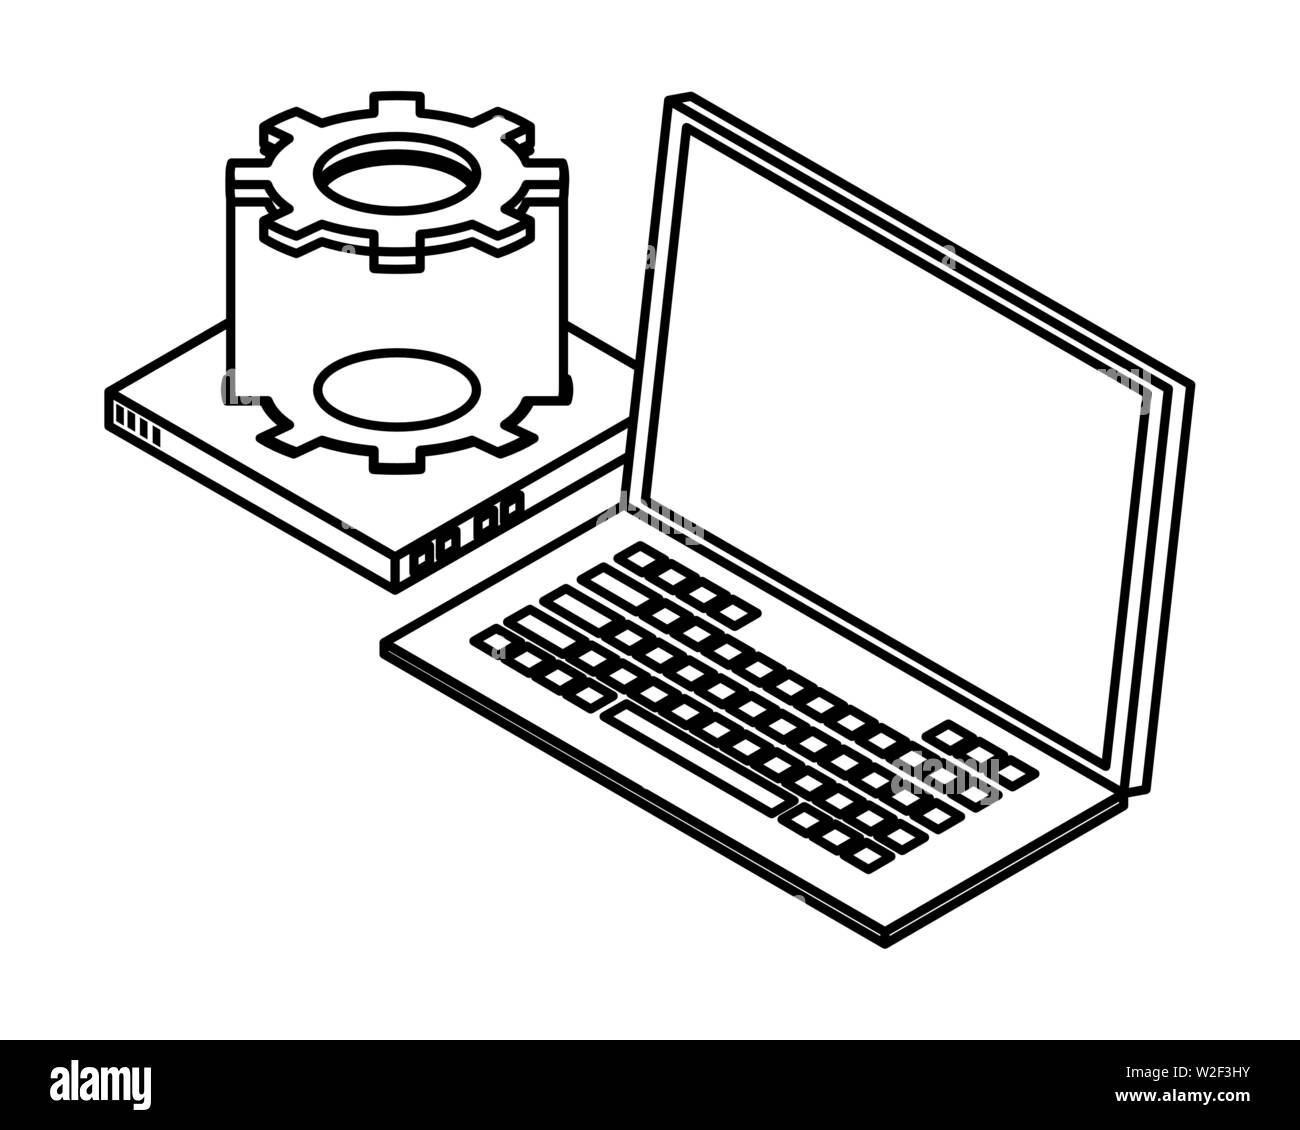 laptop hardware and computing technology in black and white Stock Vector